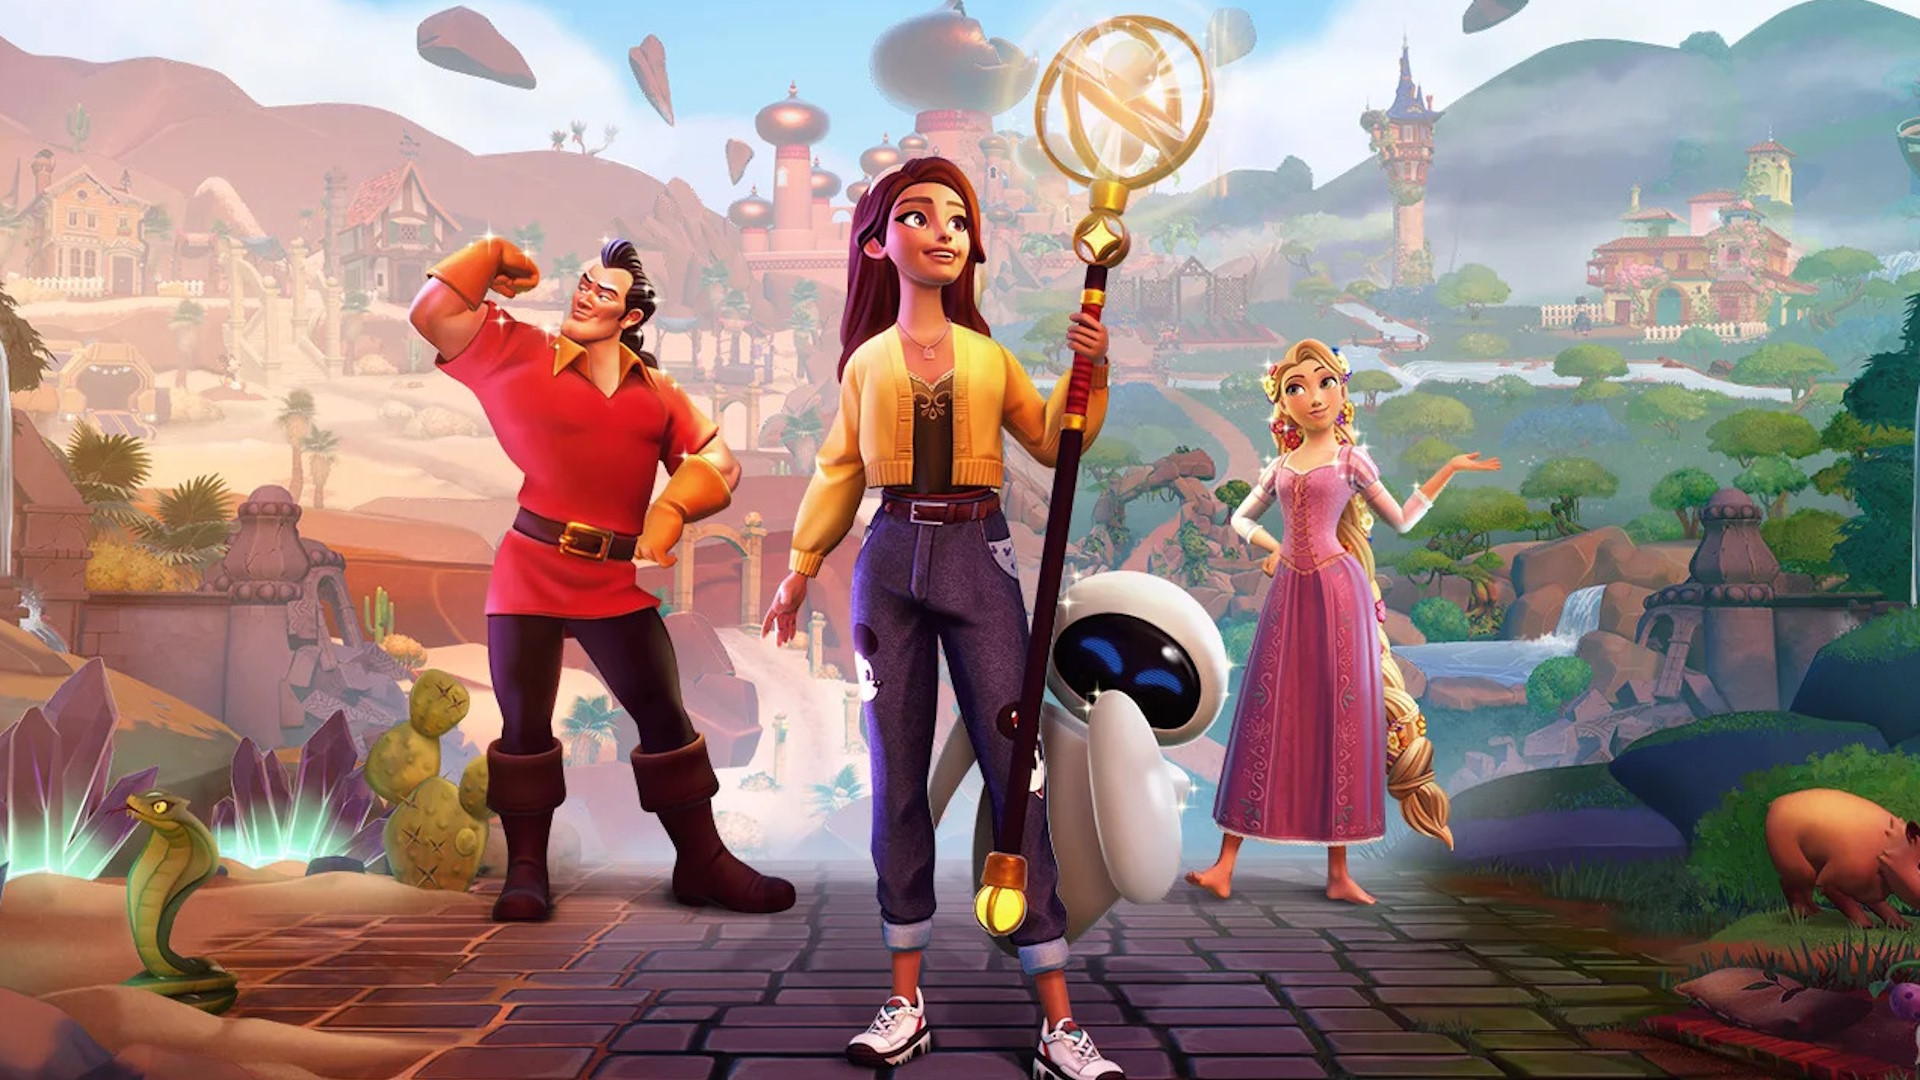  Disney Dreamlight Valley ditches free-to-play plan at the last minute, will launch in December as a premium game 